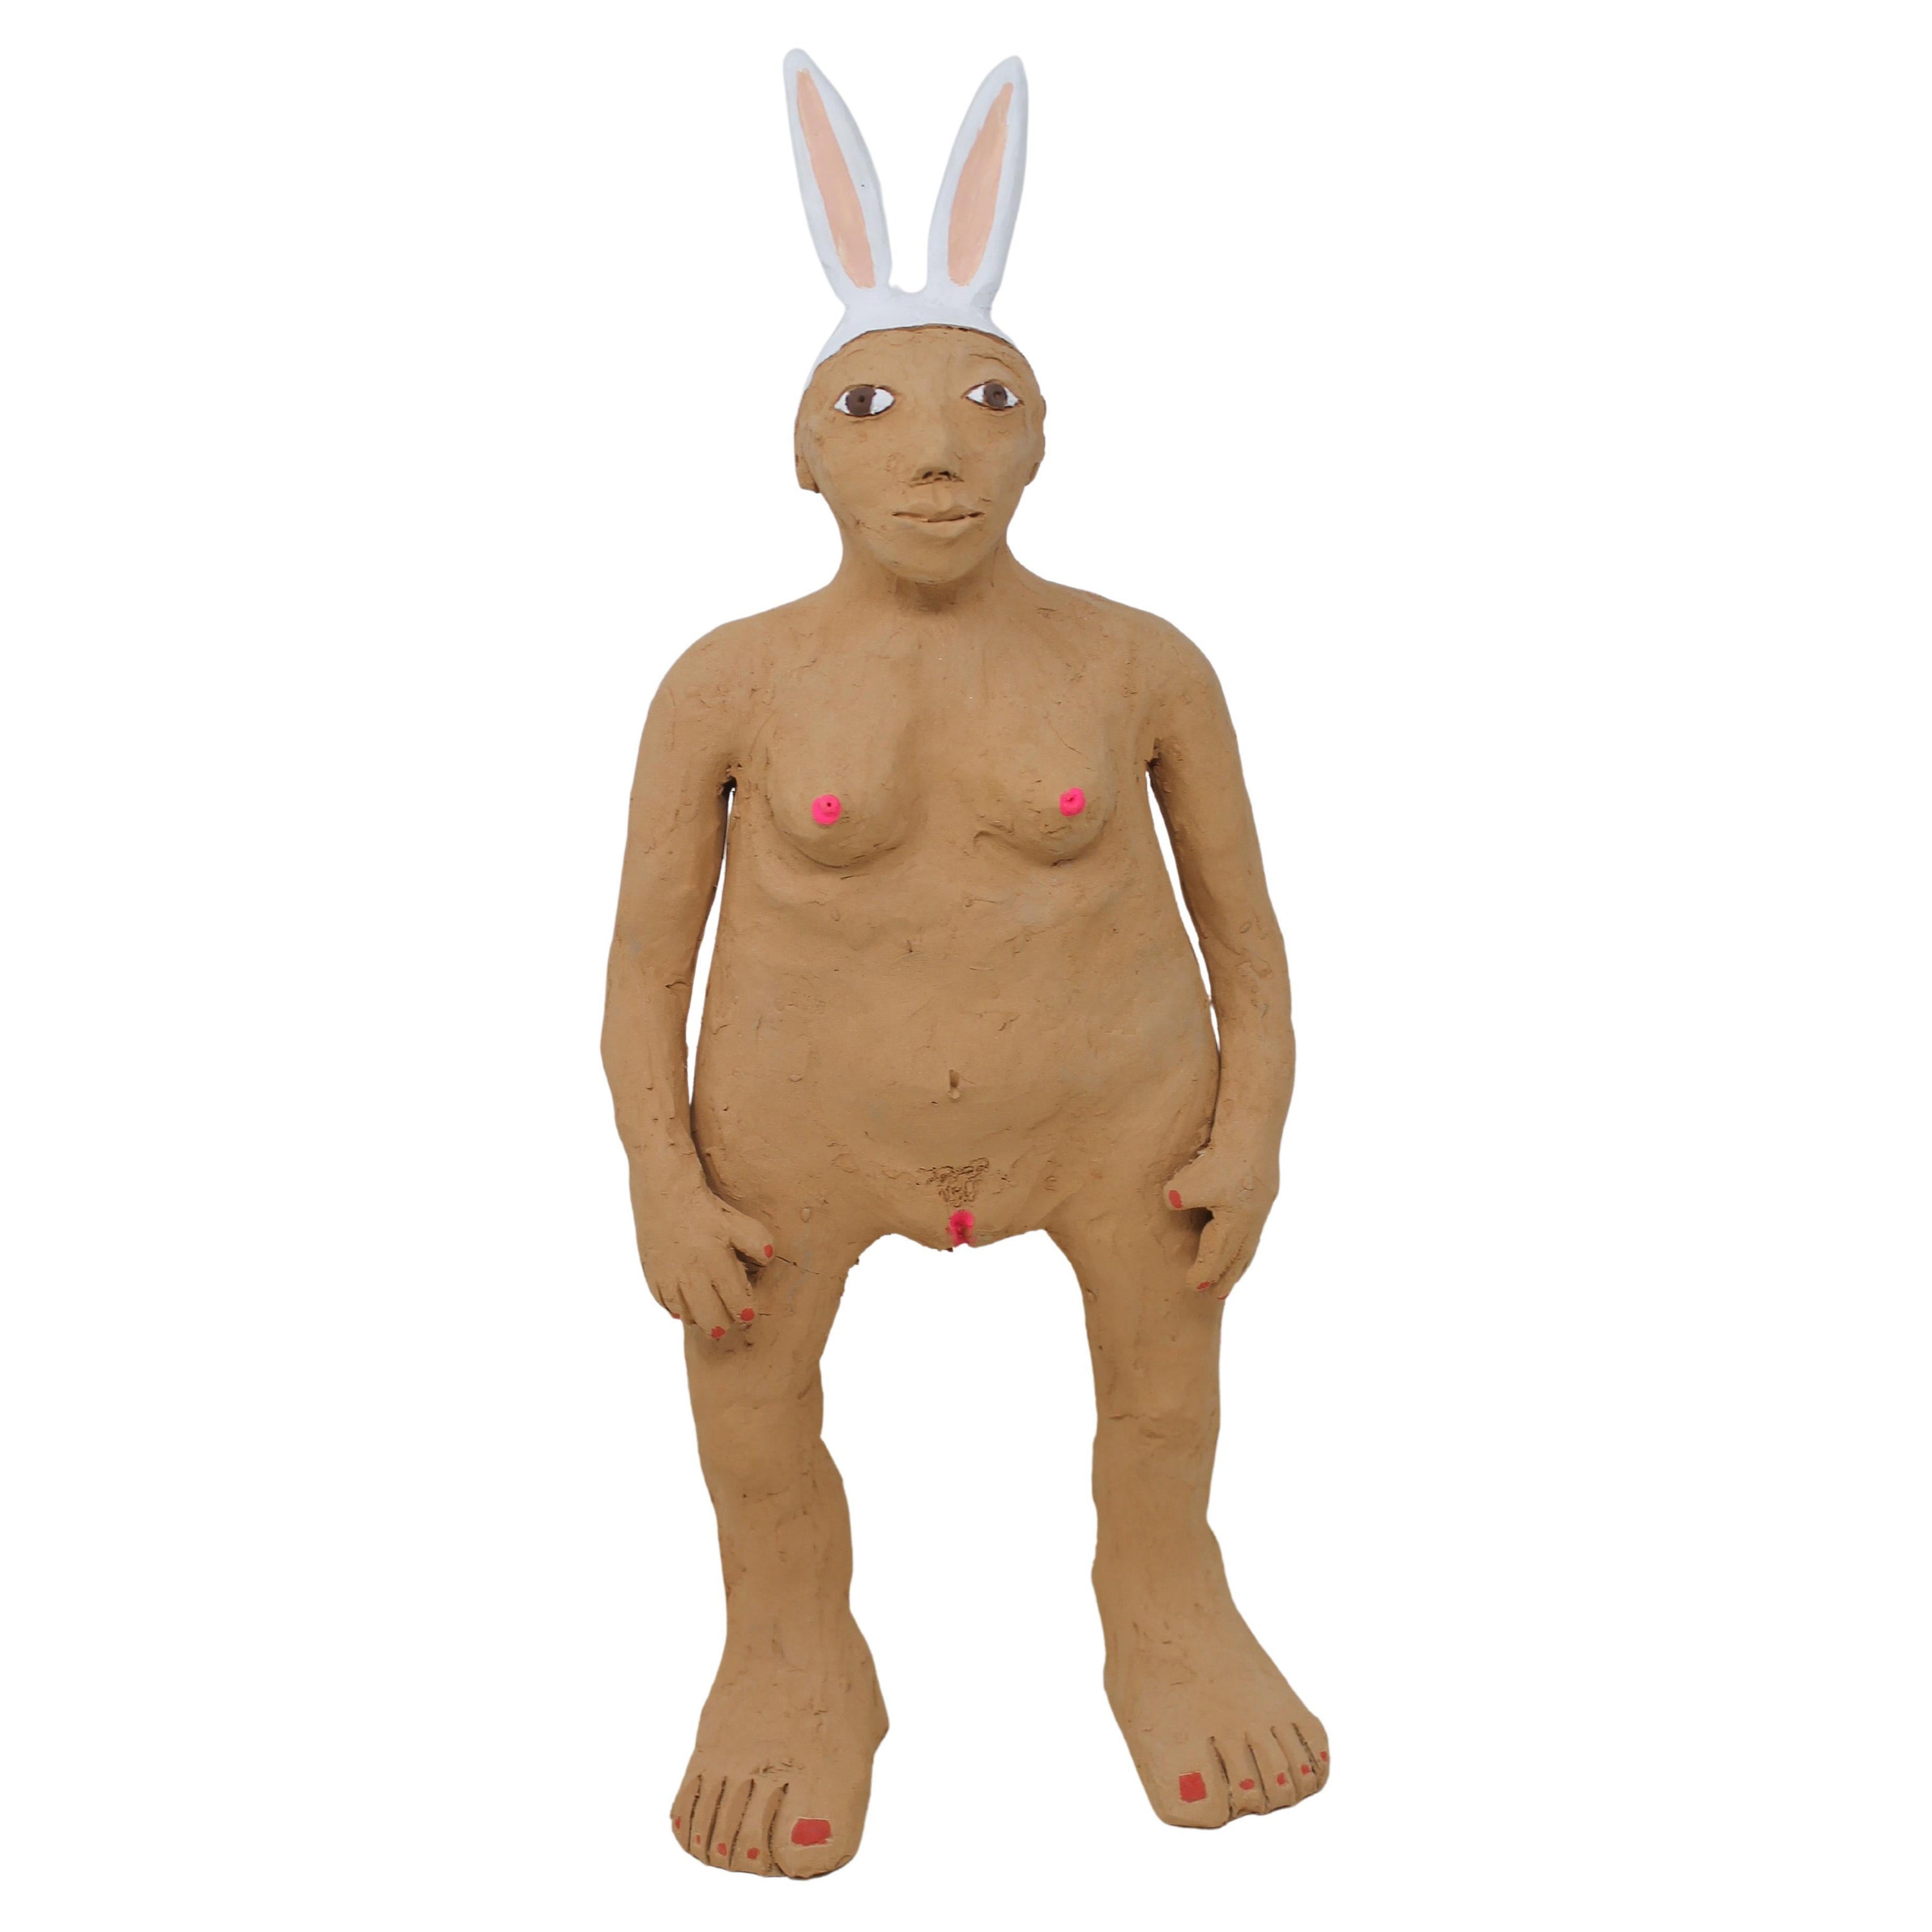 Freaklab Big Humans Made Entirely by Hand in Terracotta, Woman-Rabbit For Sale